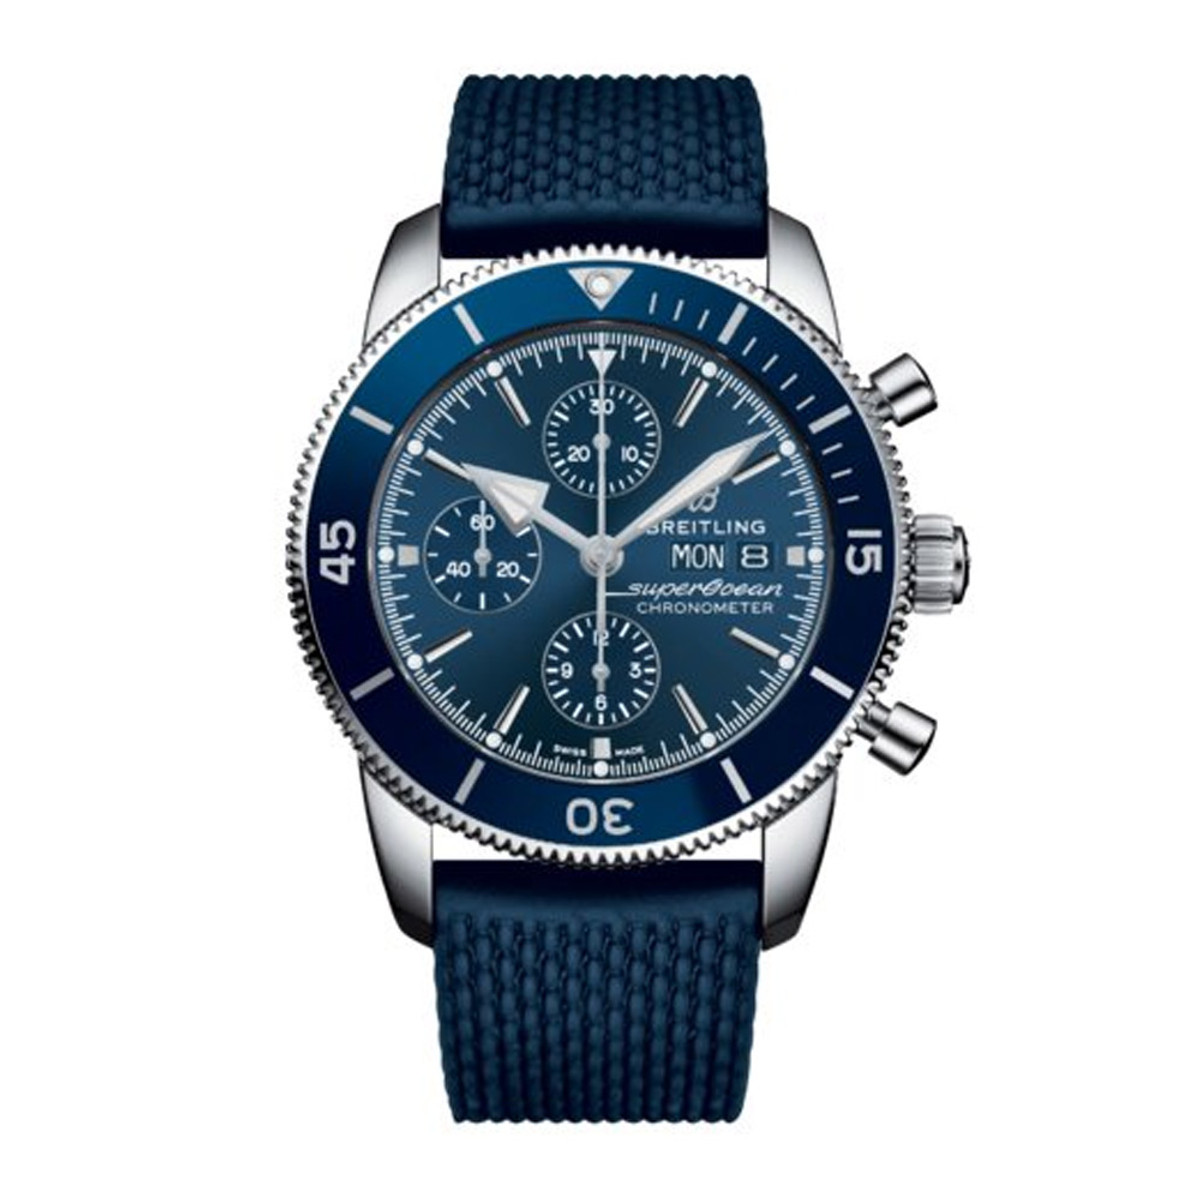 Breitling Superocean 44 Heritage Automatic Chronograph A13313161C1S1-WBTG1795